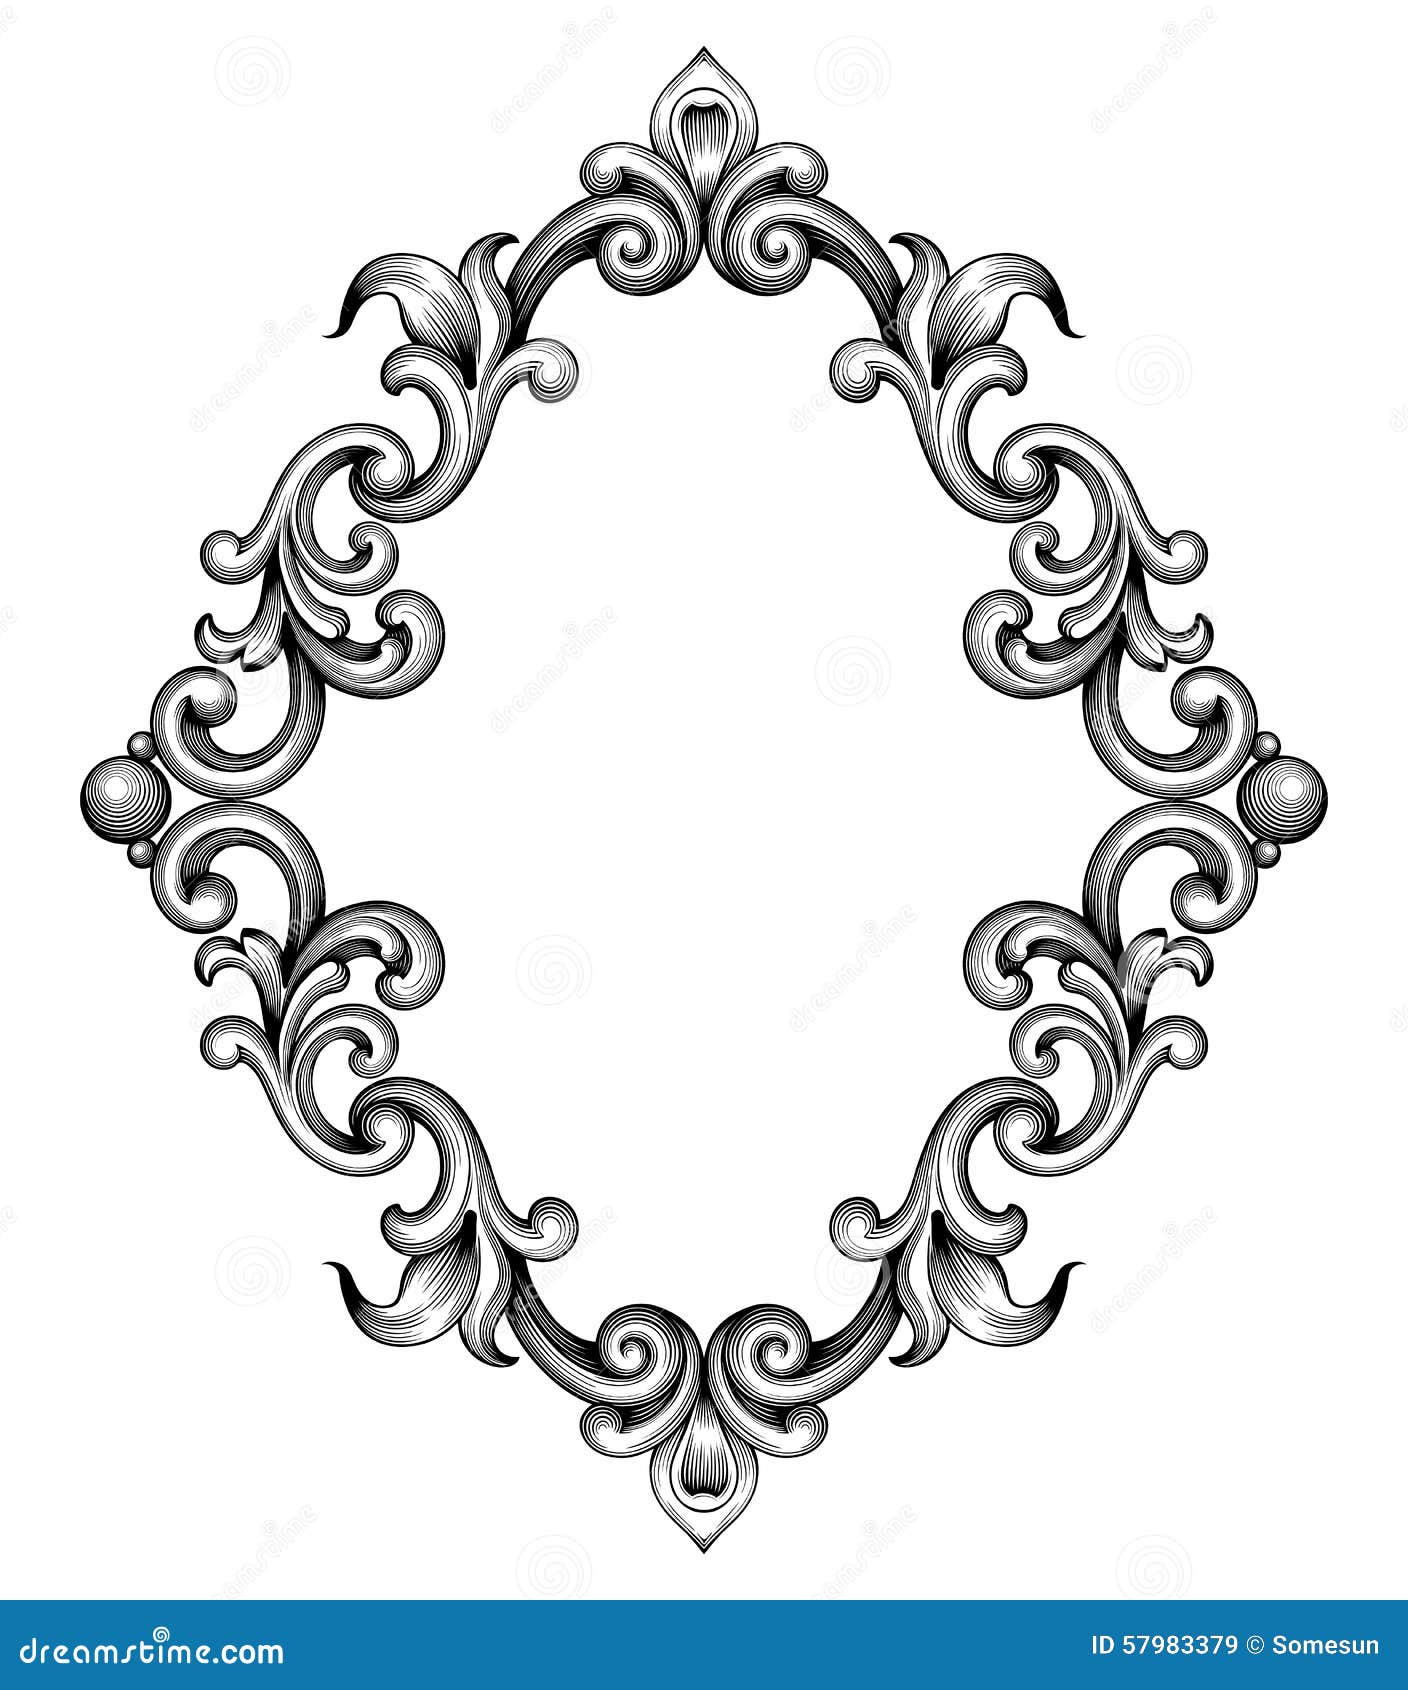 Decorative frames and borders vintage scroll Vector Image